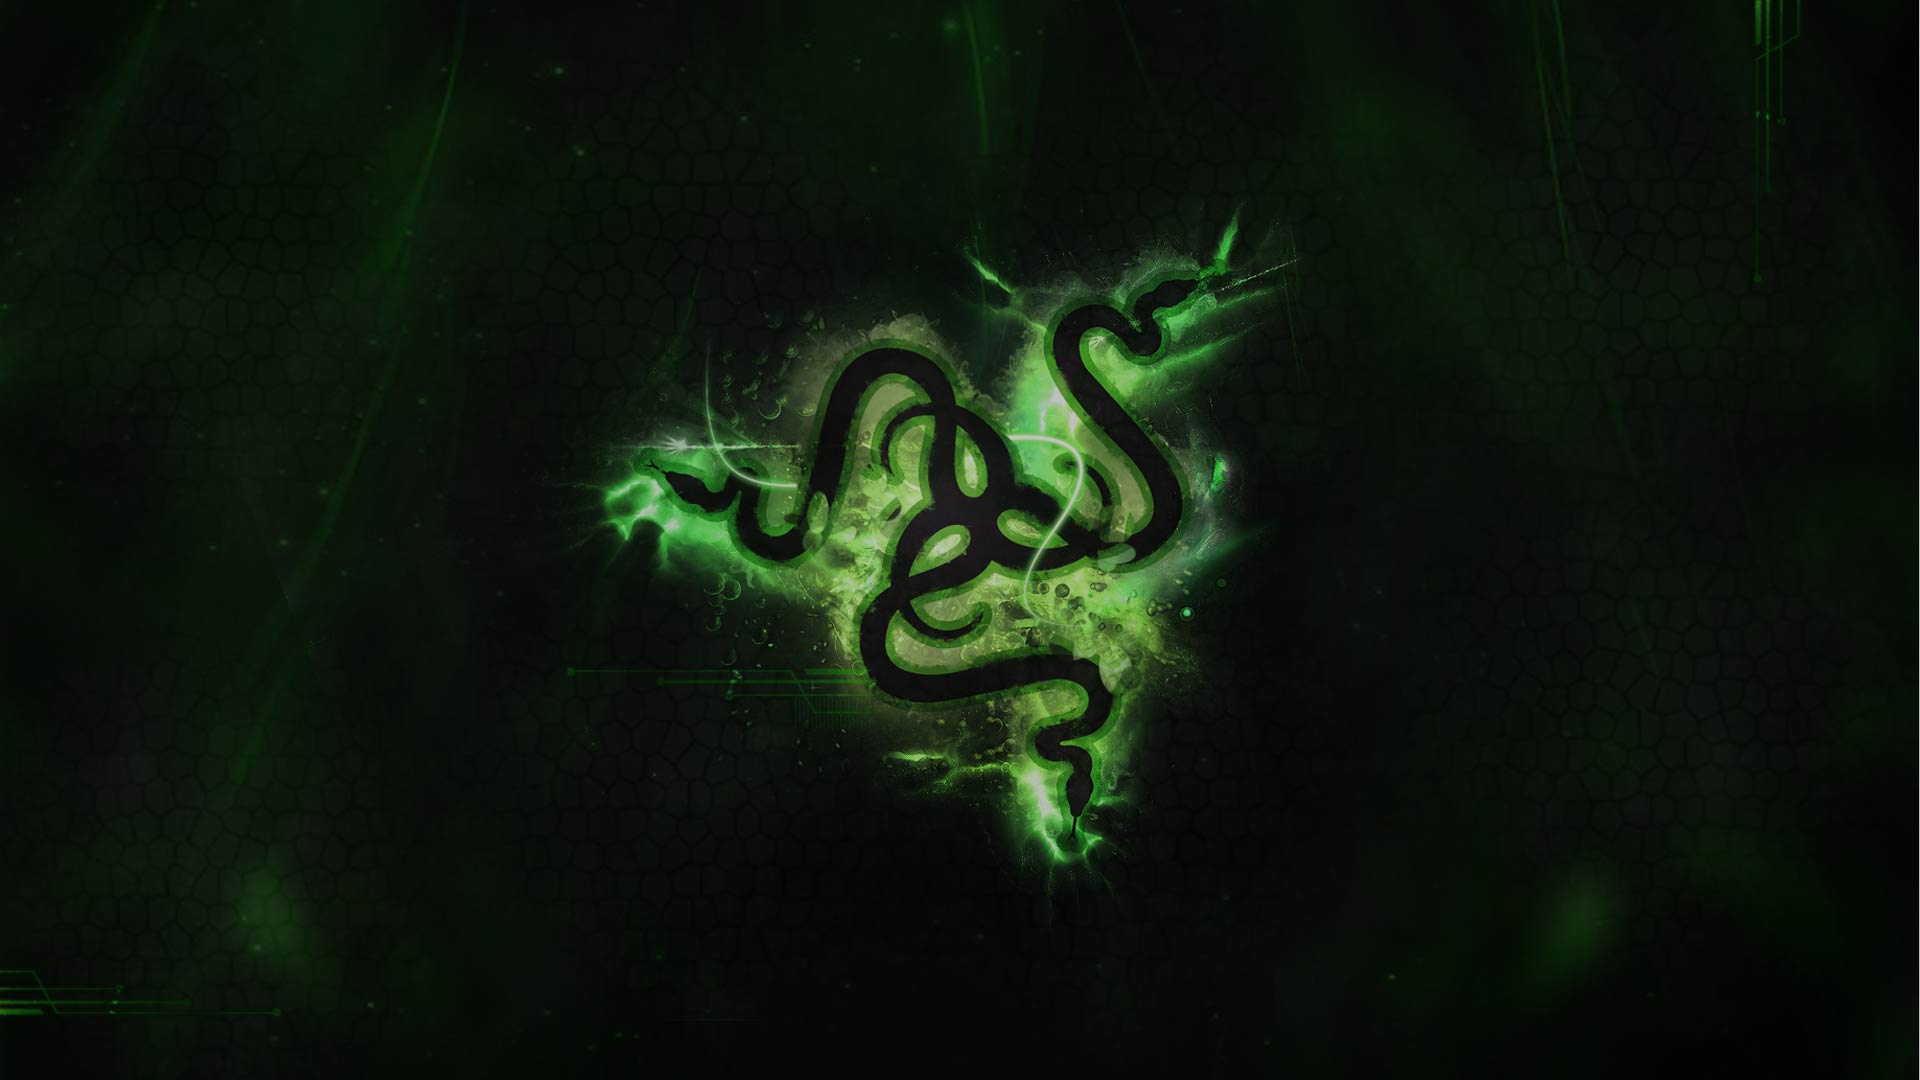 Wallpapers For > Razer Wallpapers Red